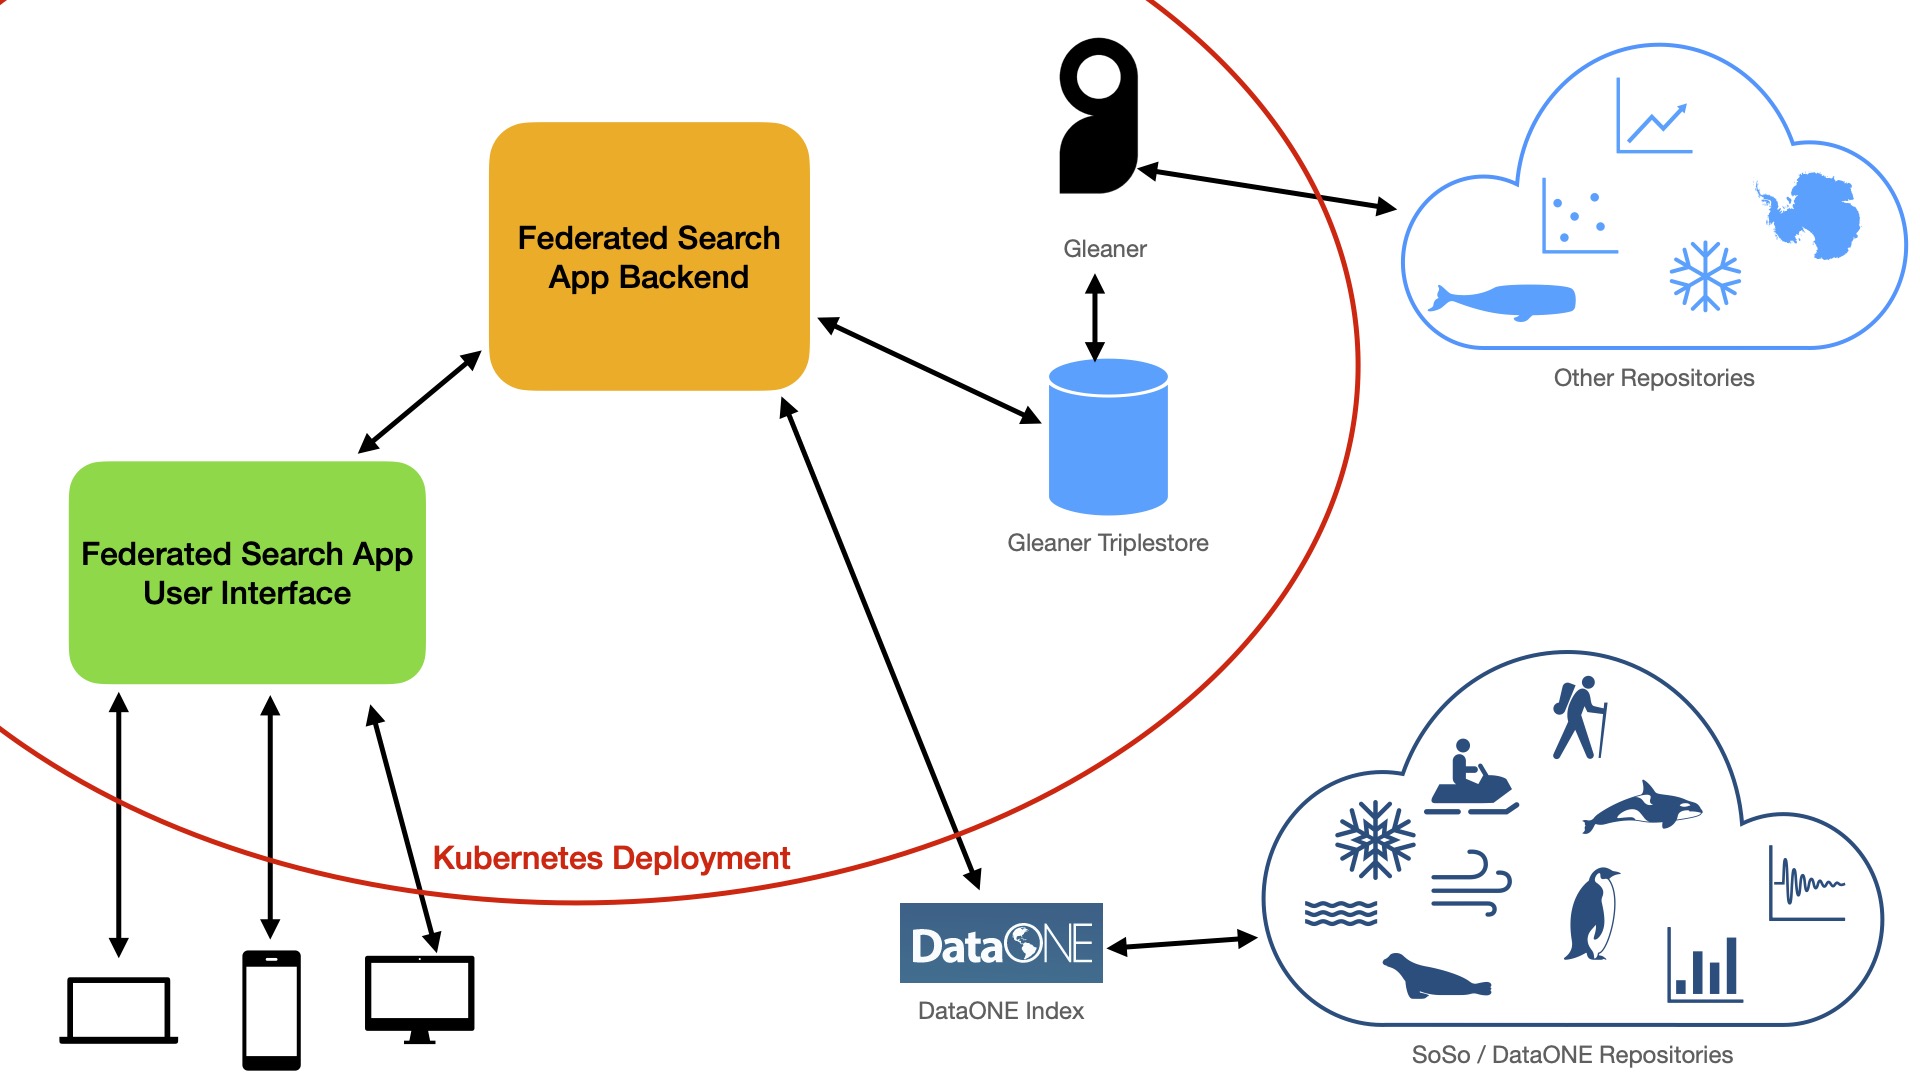 A slightly bonkers diagram describing the a Polar Federated Search app that I constructed.